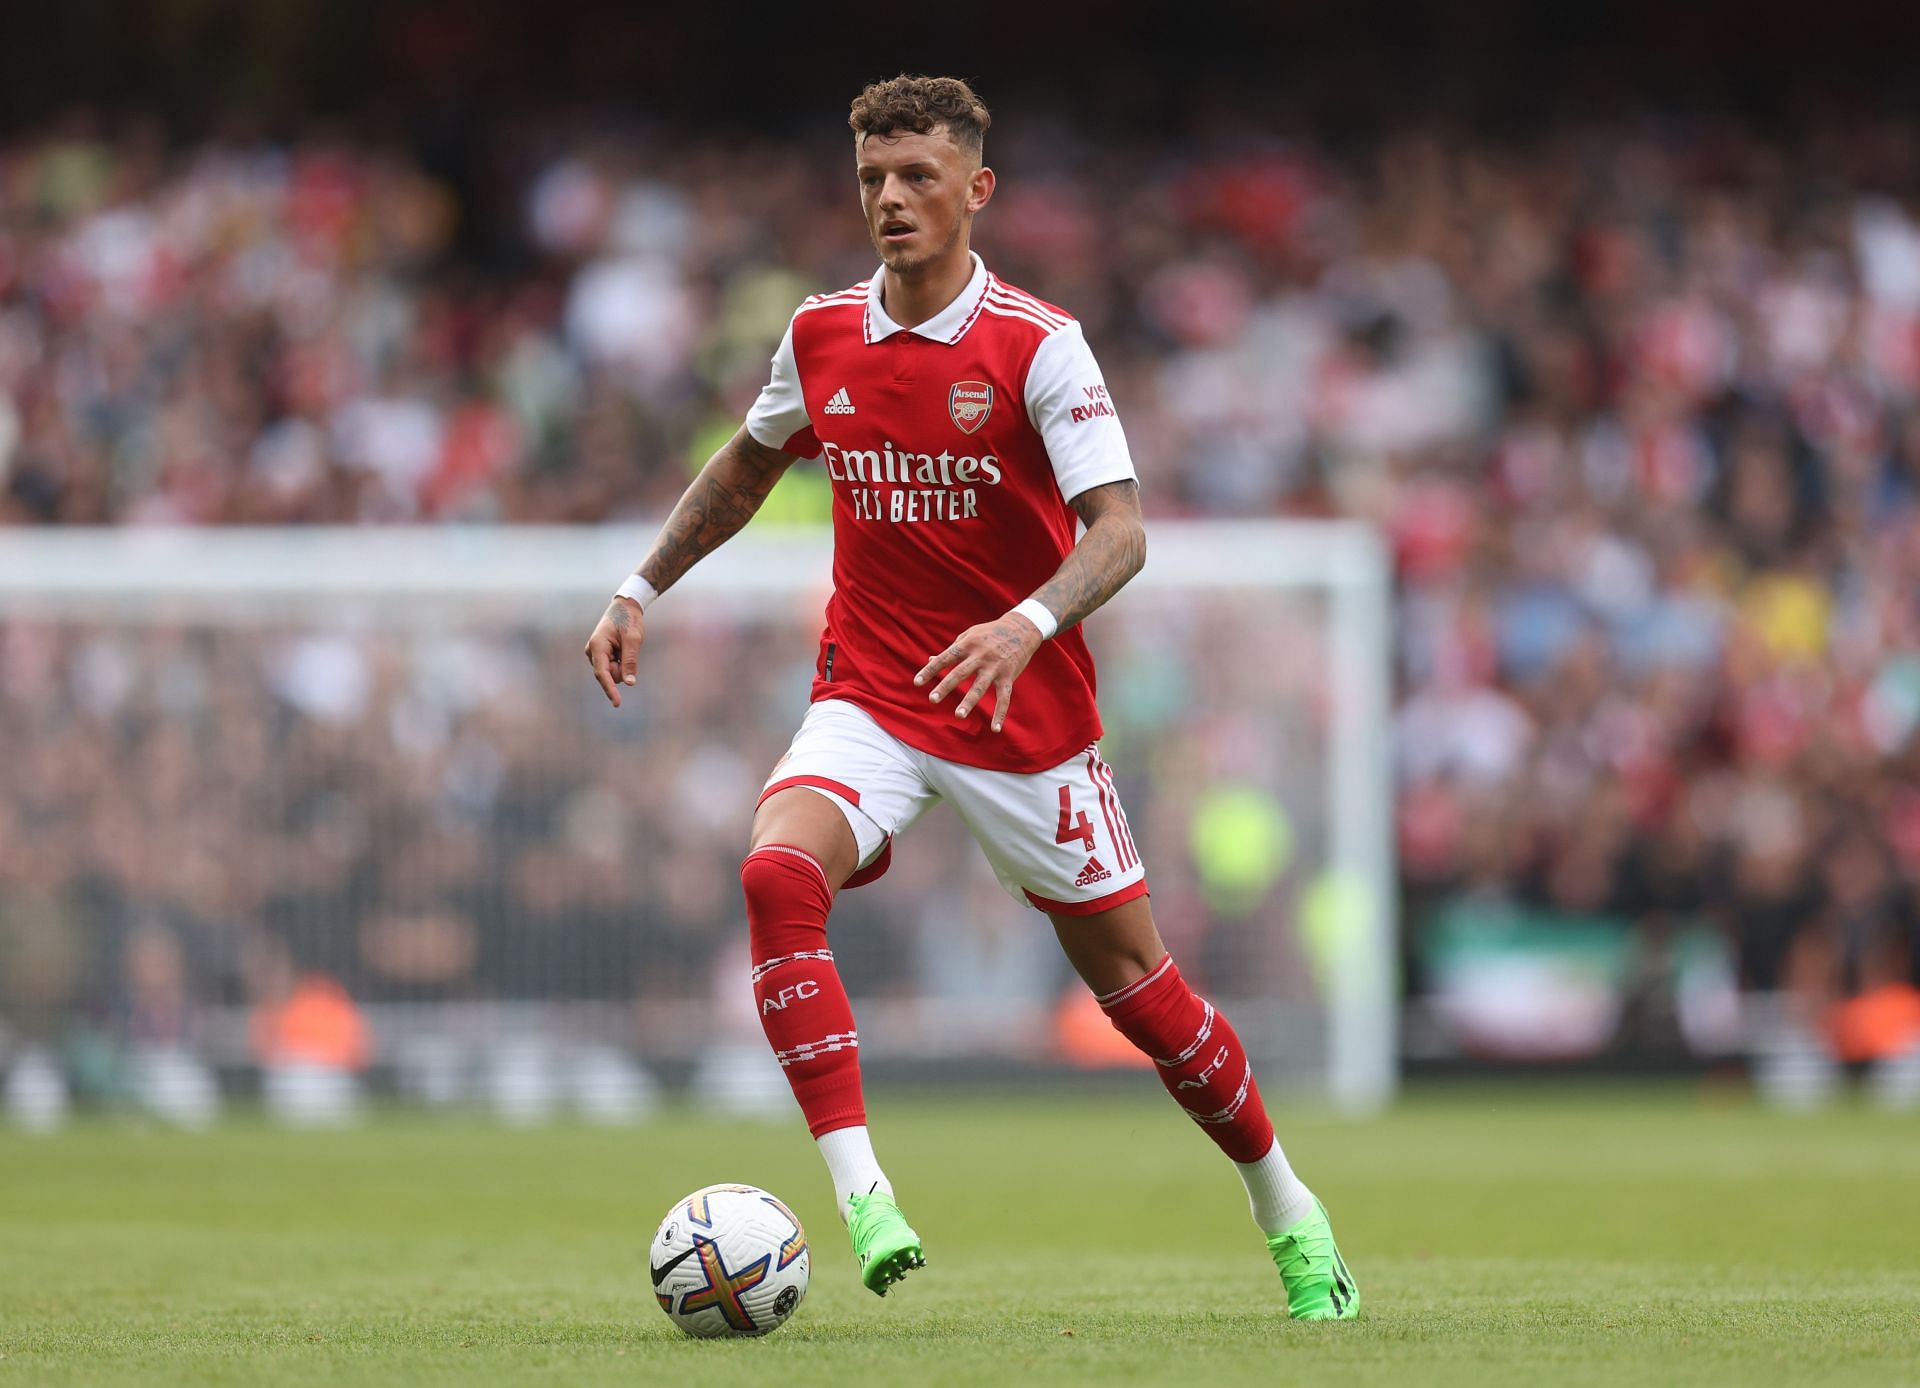 Ben White has operated in a right-back role this season at the Emirates.